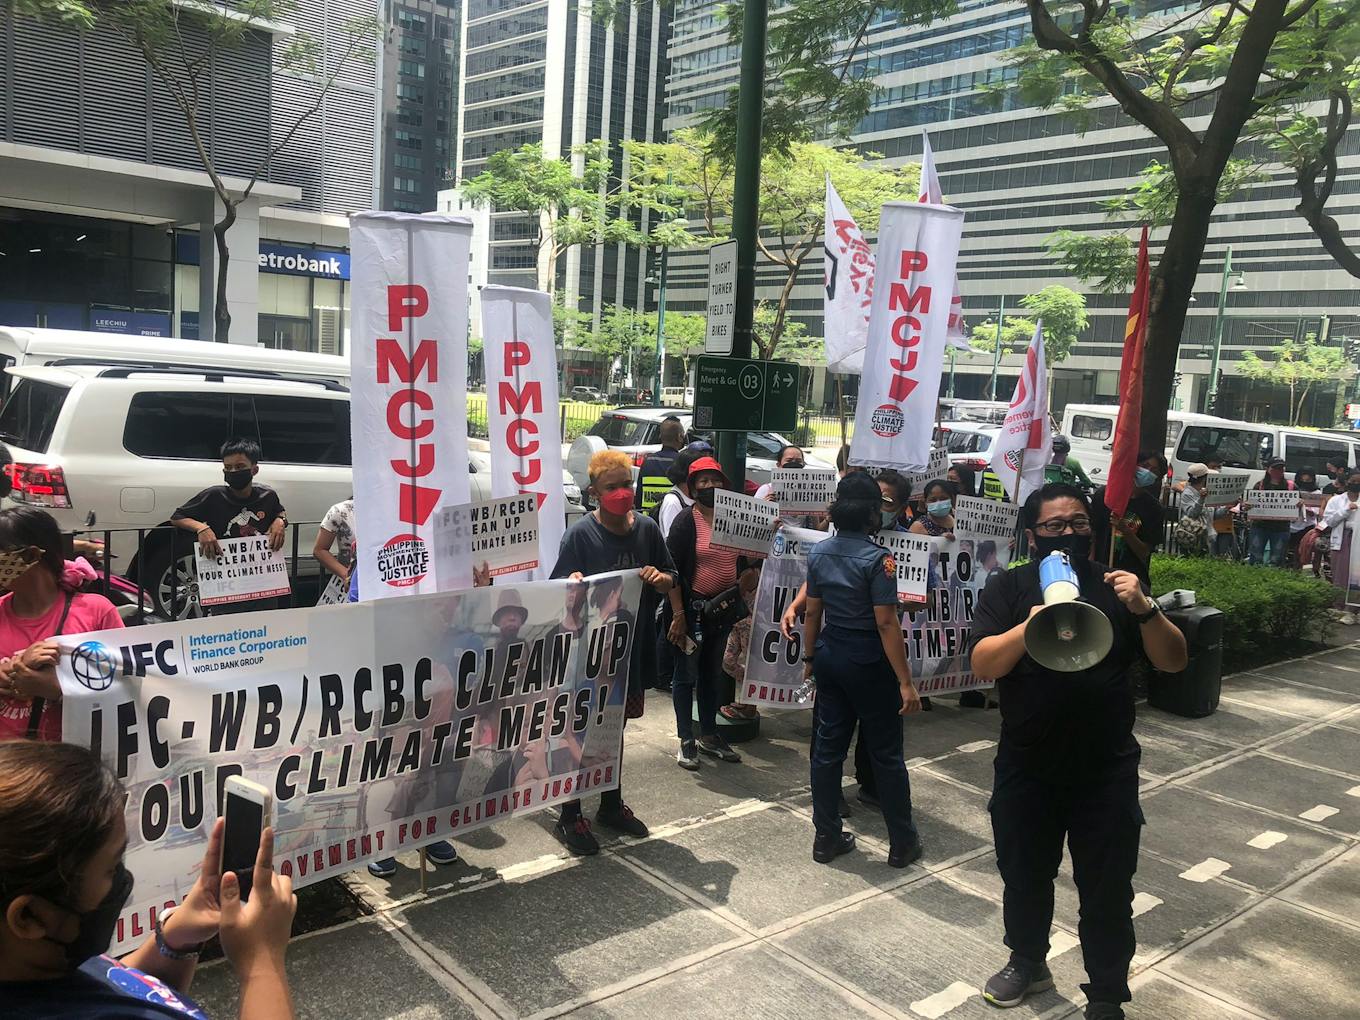 Protesters in front of the IFC office